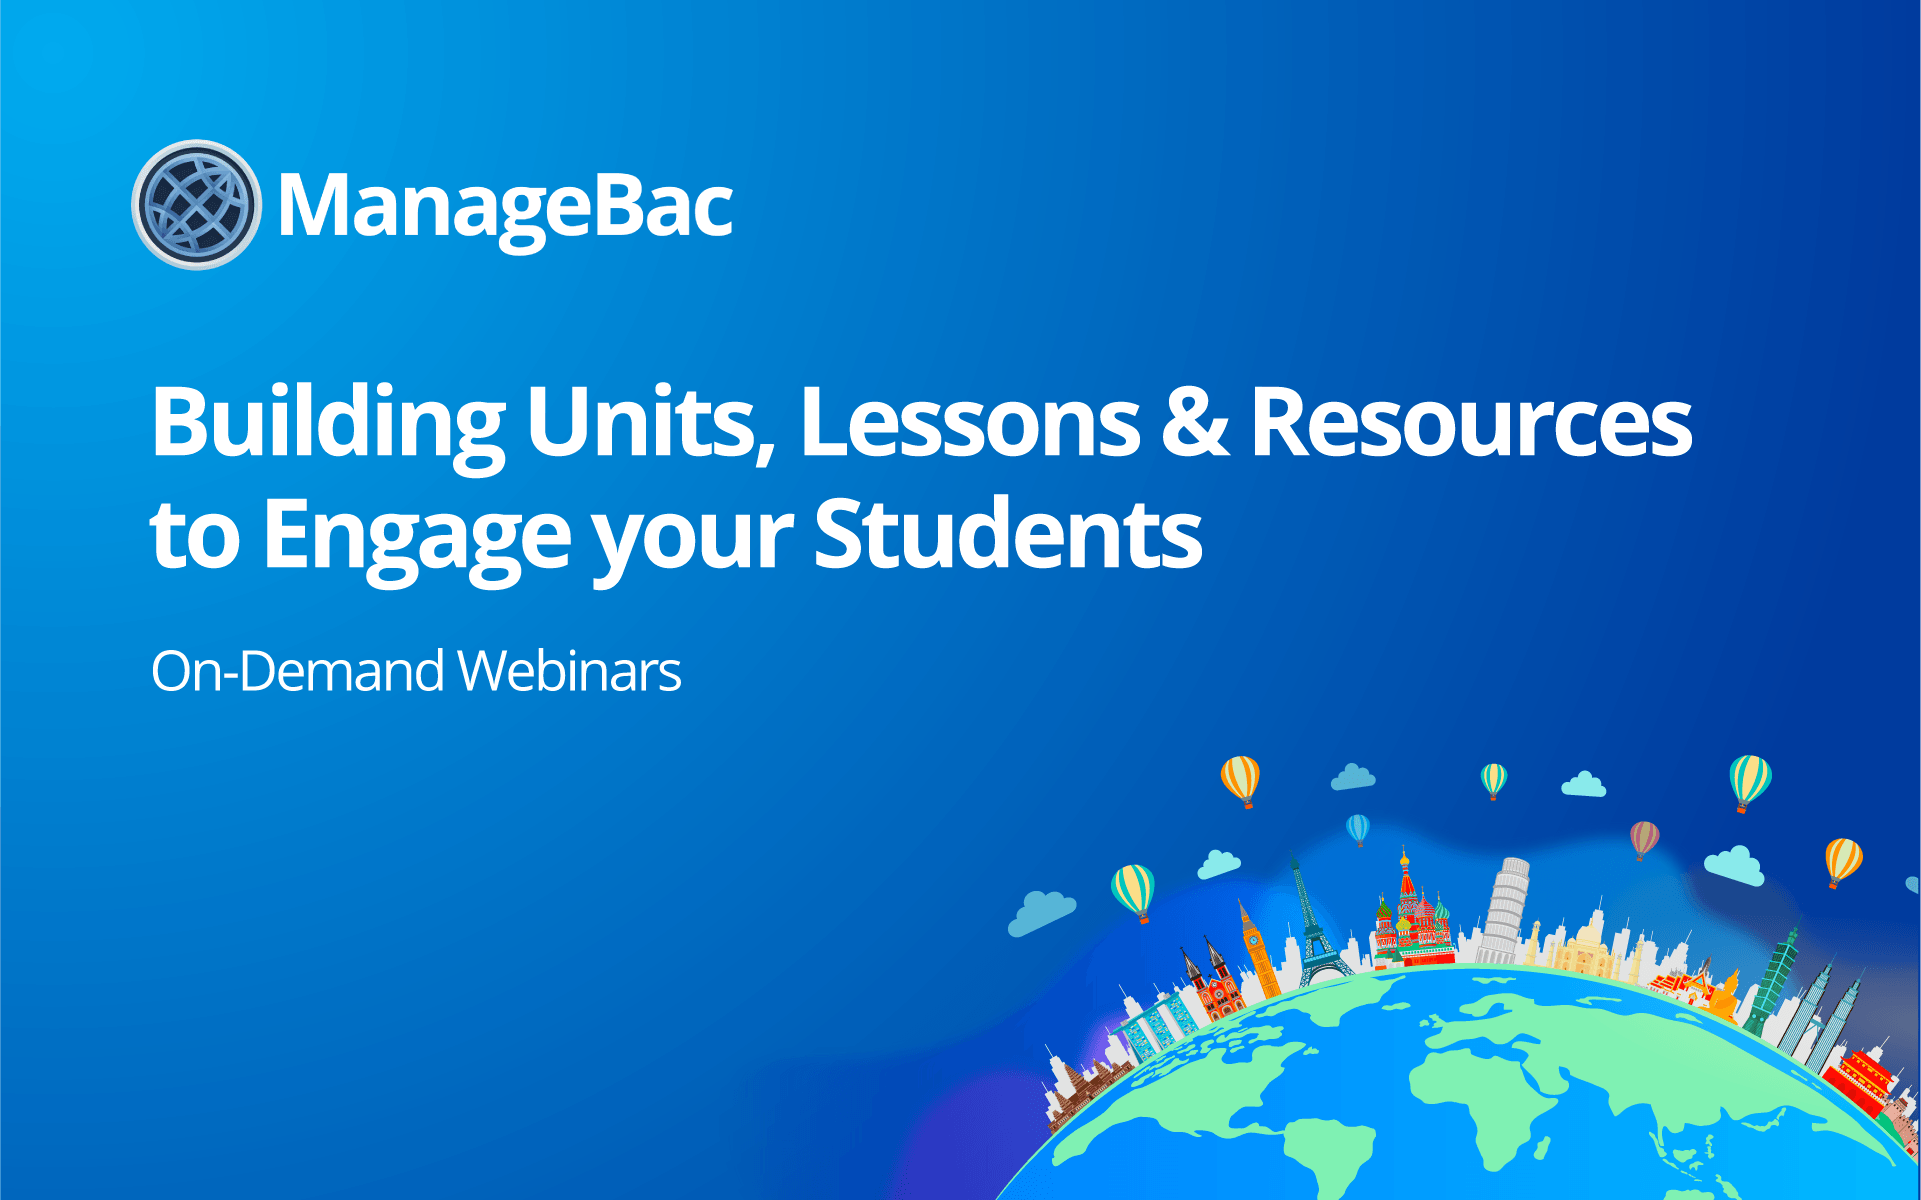 Building Units, Lessons & Resources to engage your students